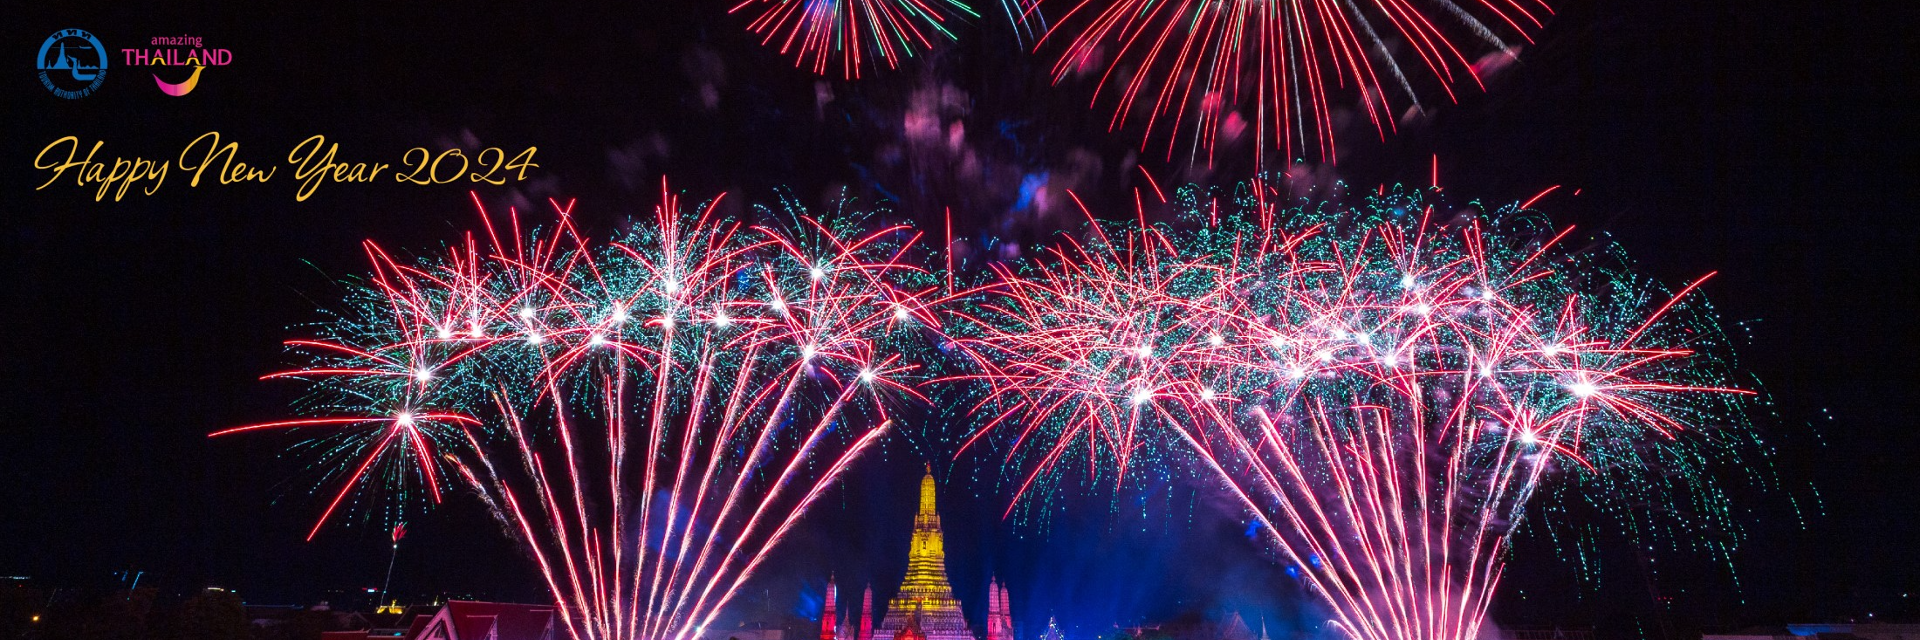 2024 New Year’s greetings message from the Governor of the Tourism Authority of Thailand